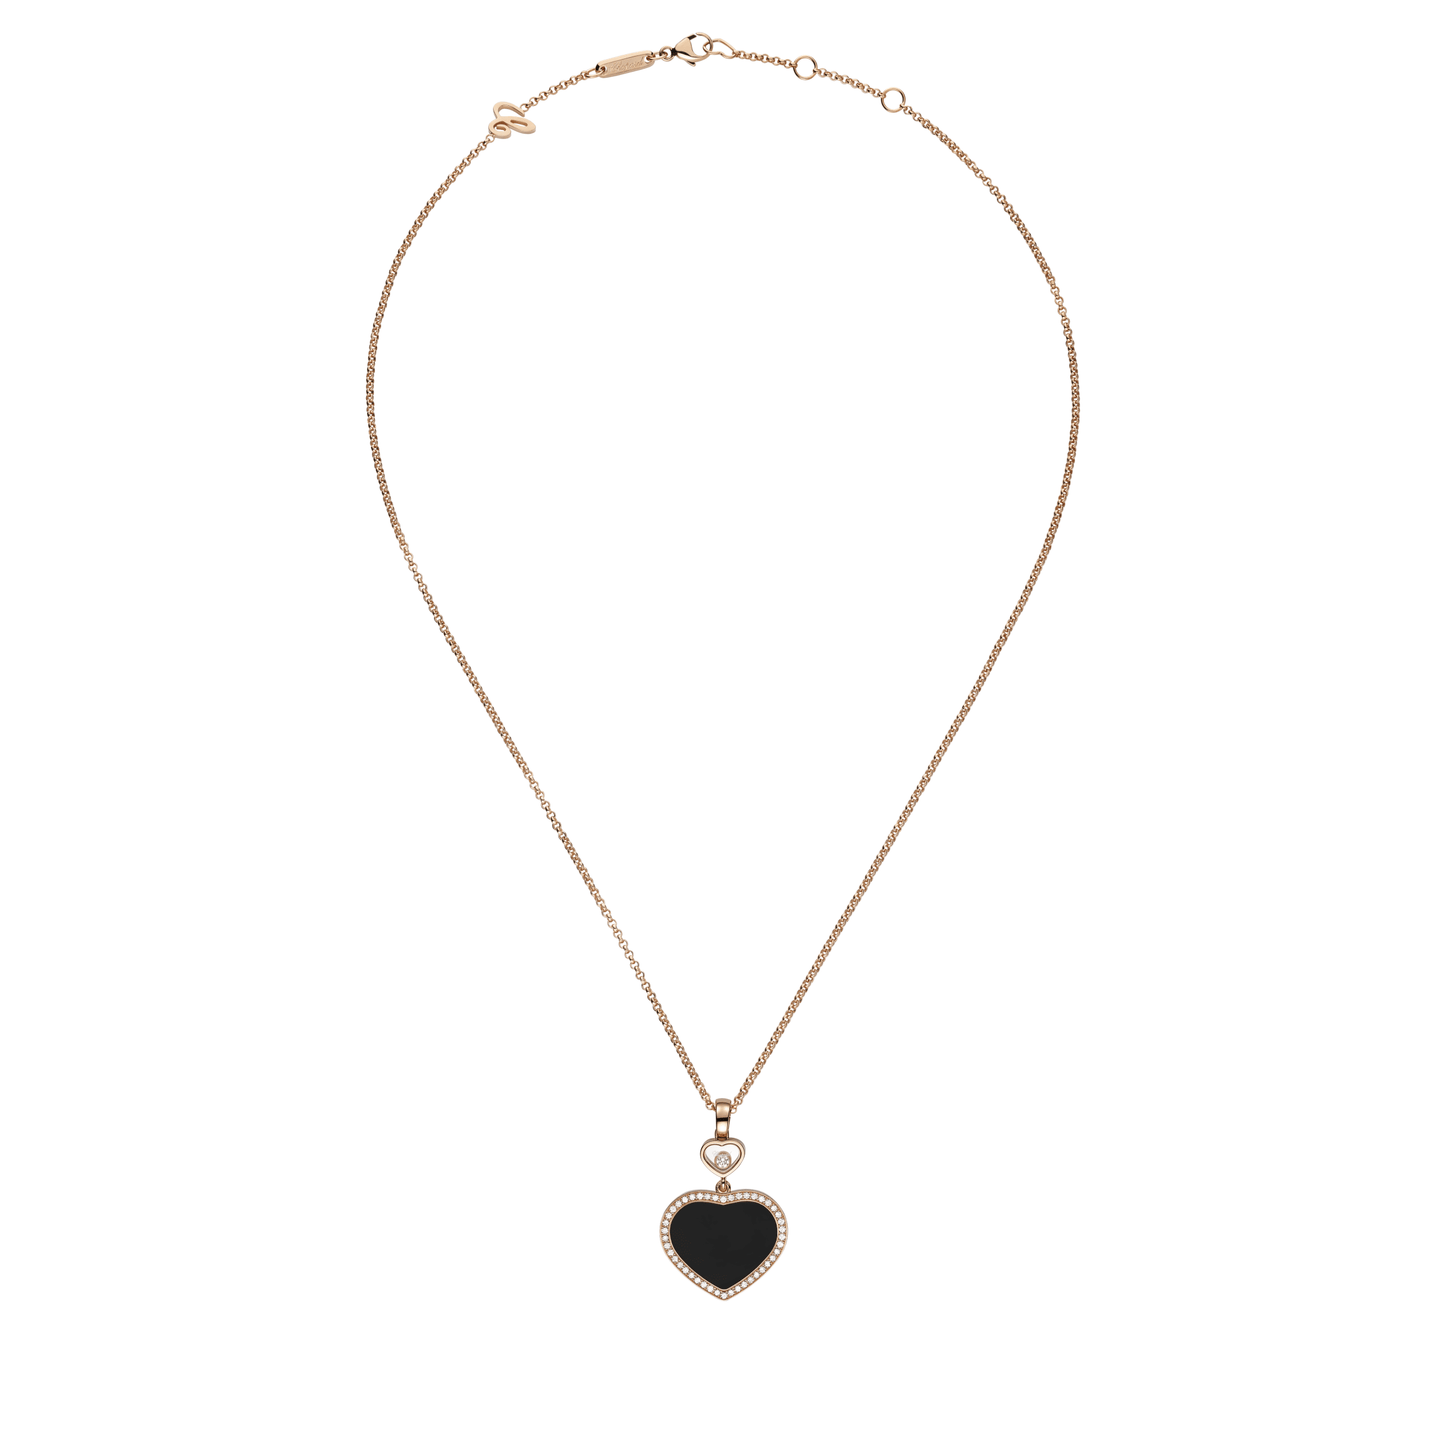 HAPPY HEARTS PENDANT, ETHICAL ROSE GOLD, DIAMONDS, ONYX 79A074-5201